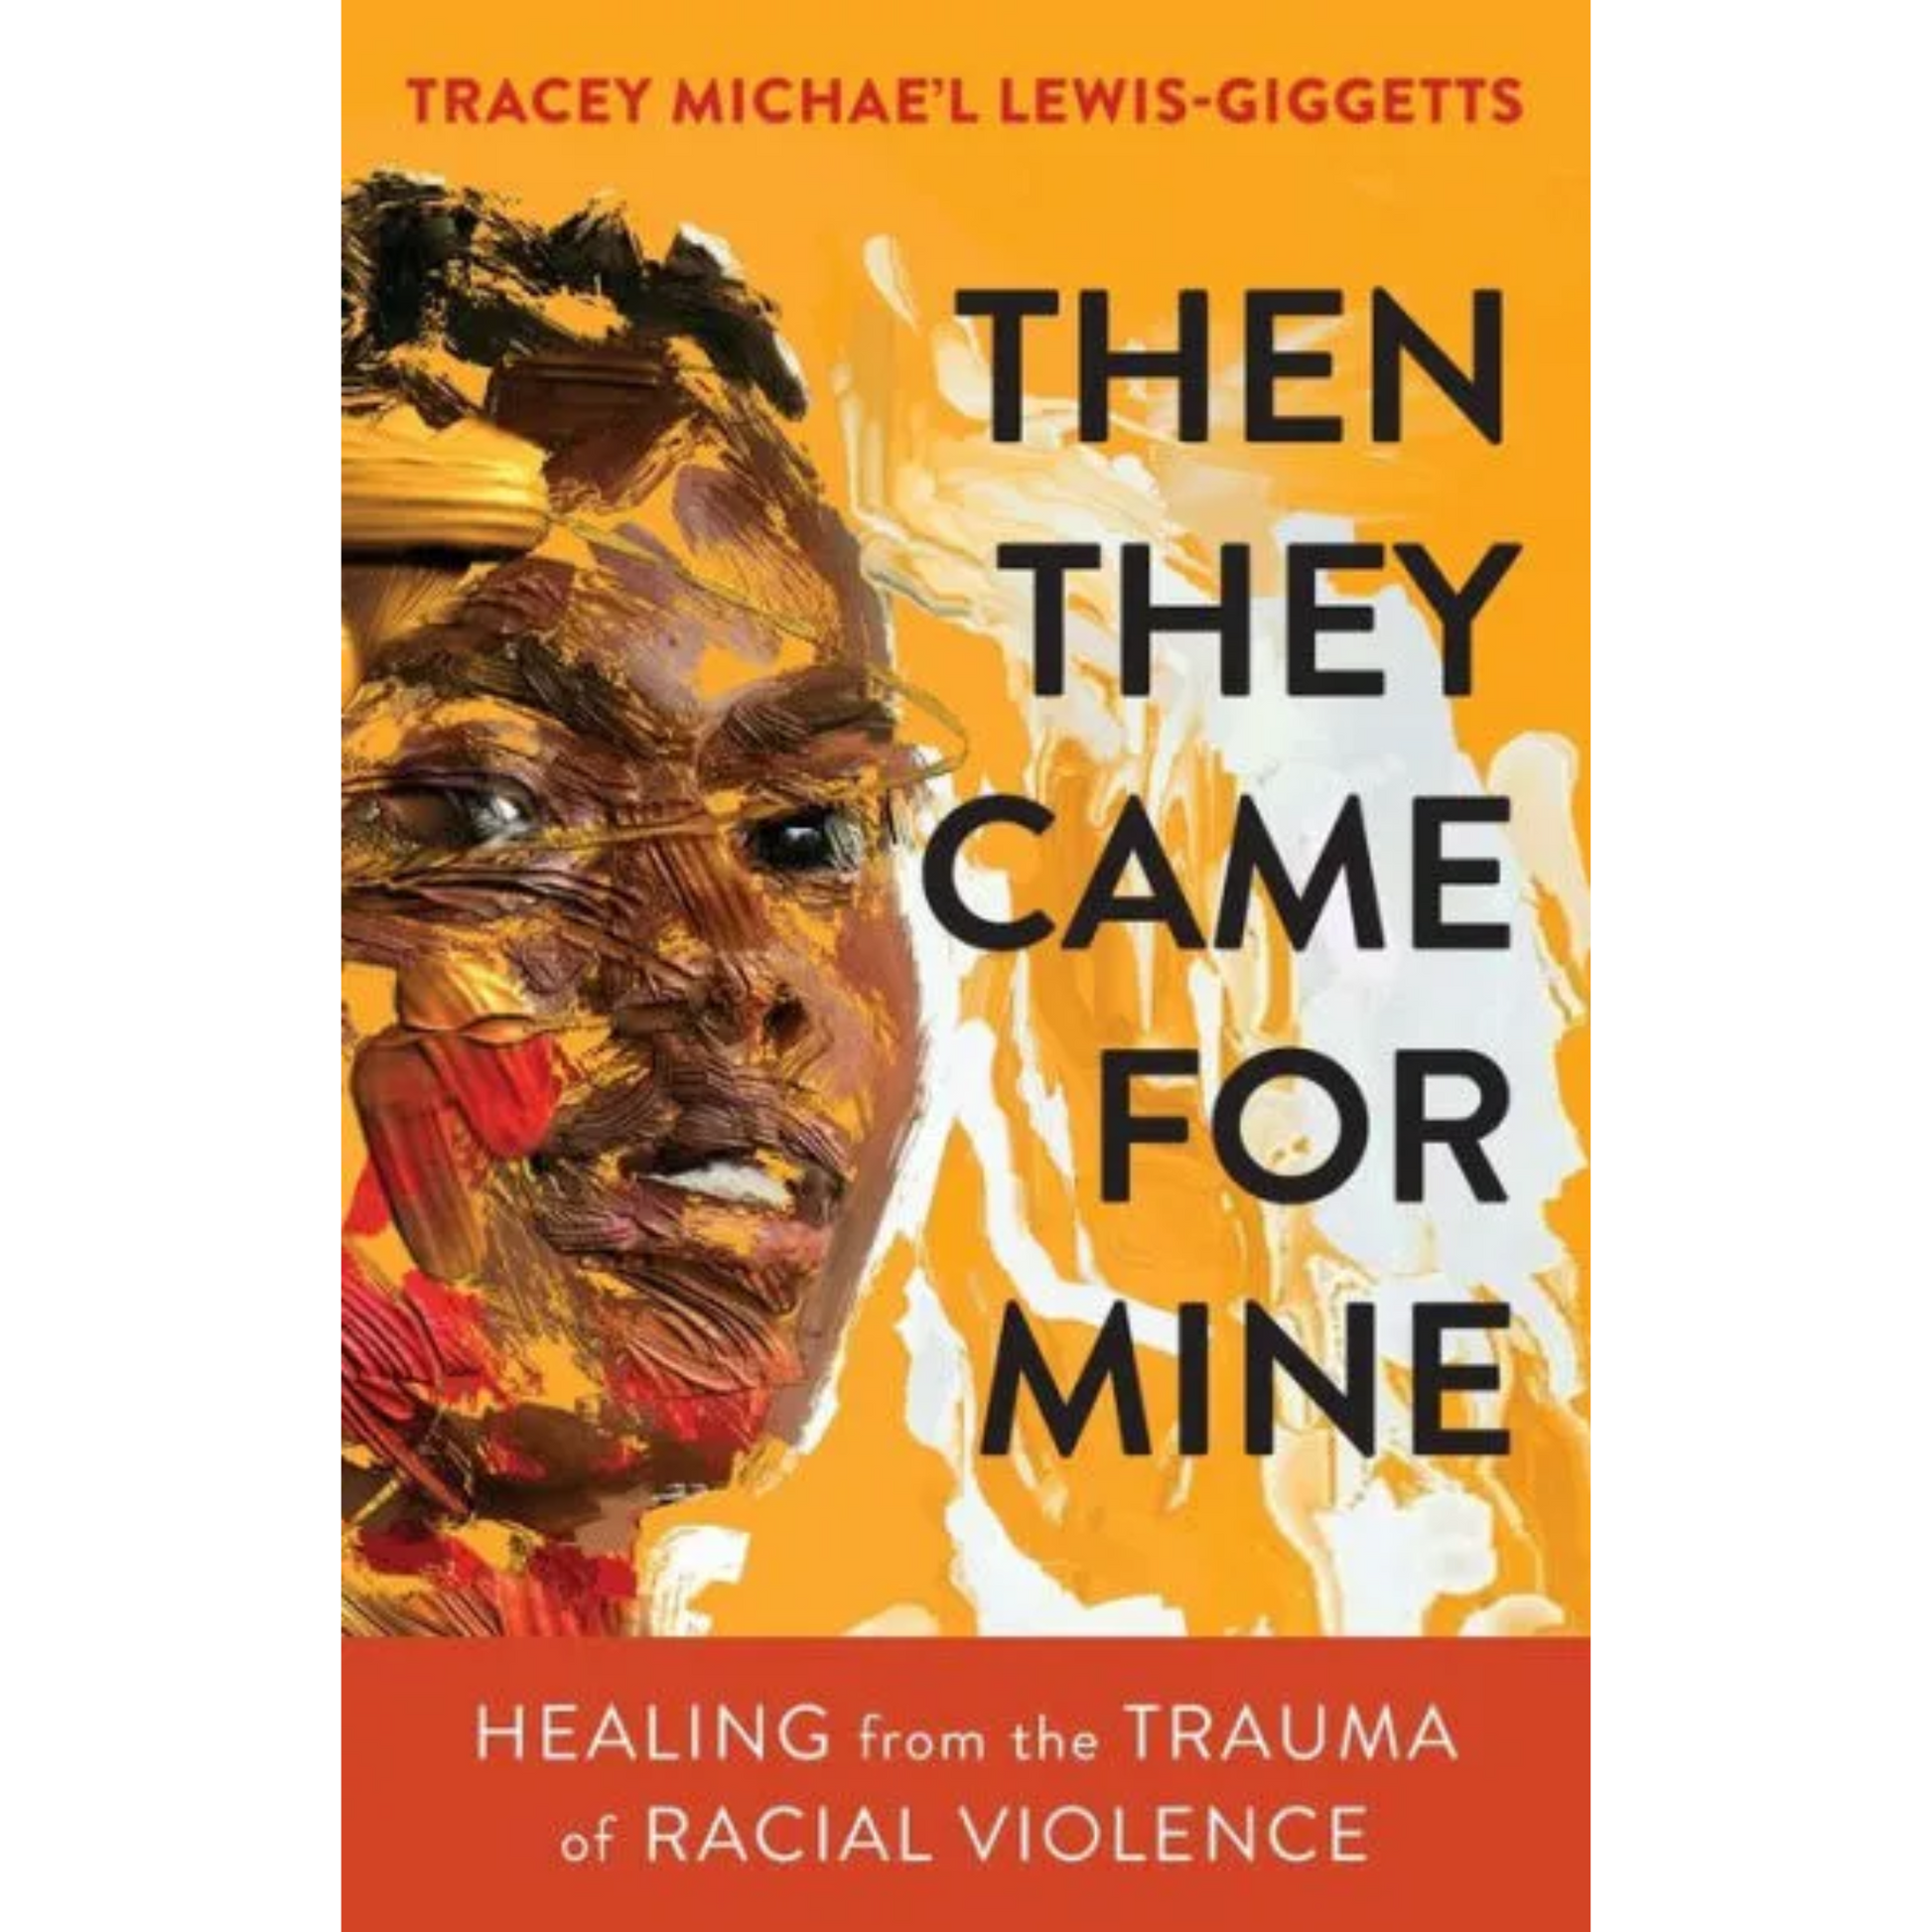 then they came for mine tracey michael lewis-giggetts